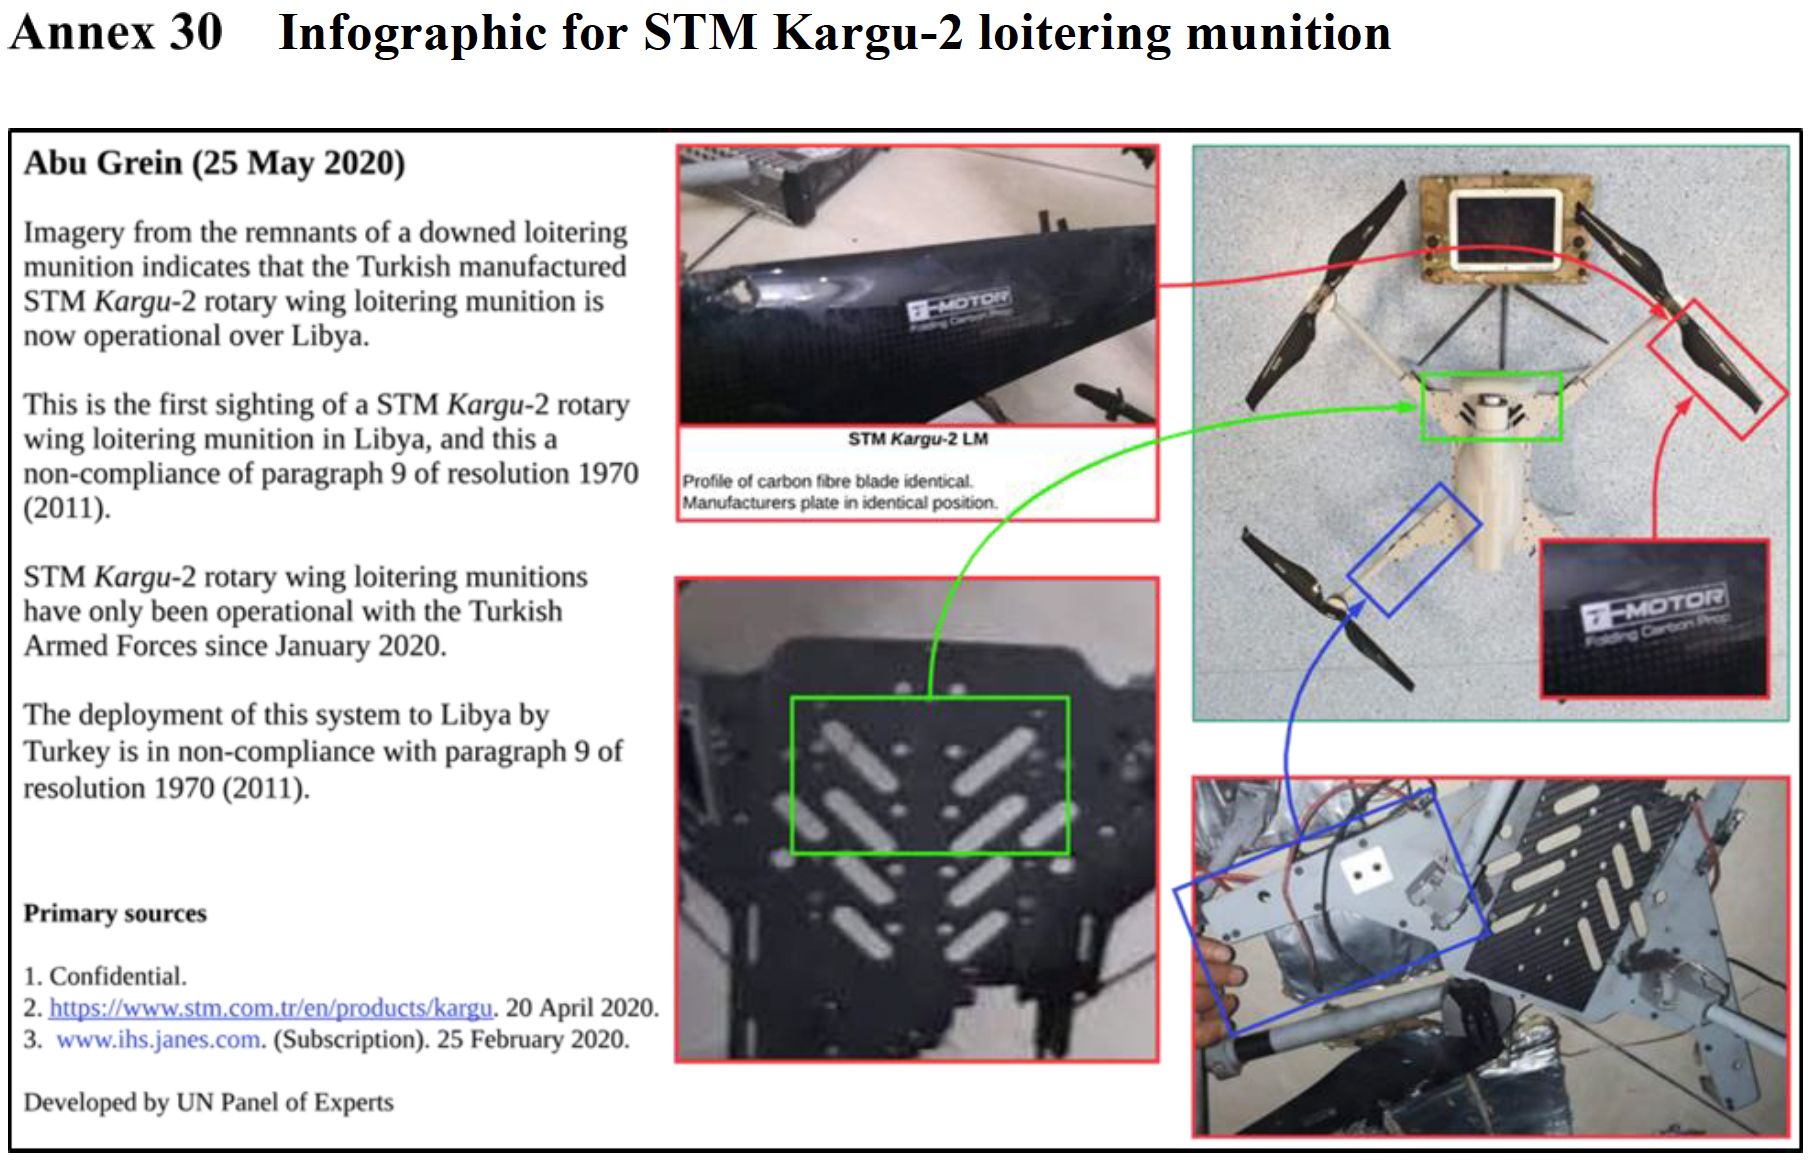 Annex 30 of the UN report depicts photographic evidence of a downed STM Kargu-2 system.